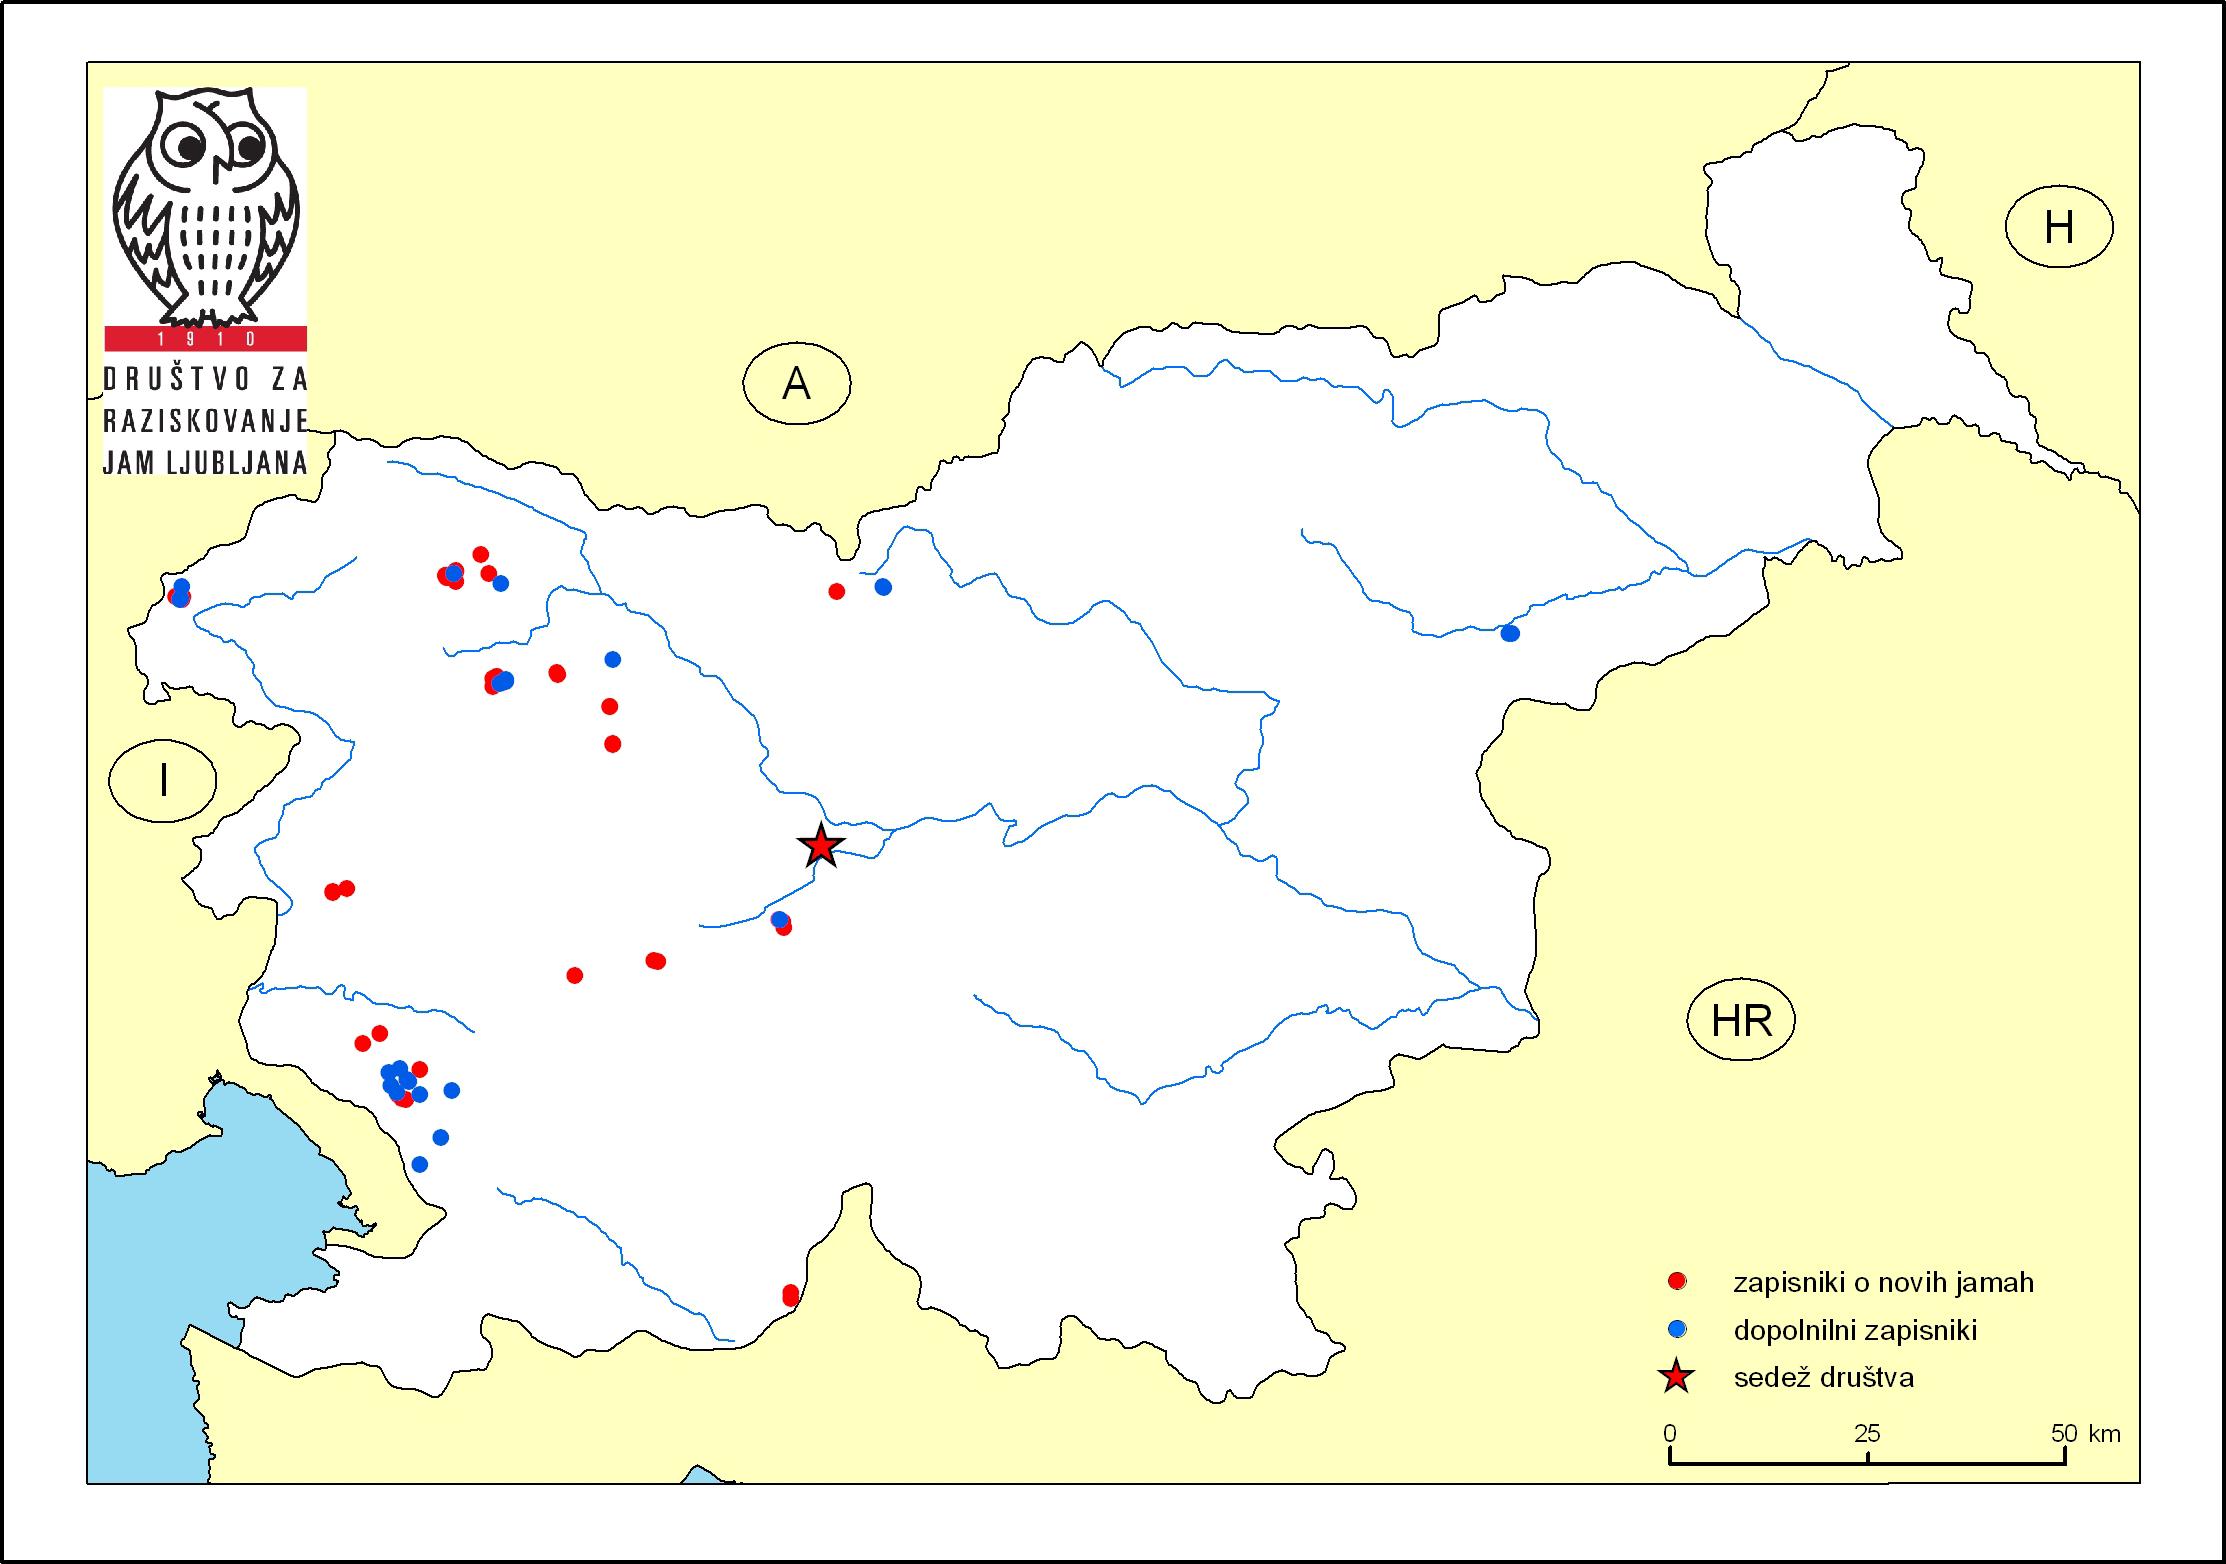 Map locations of new caves for which data records were entered in 2012 or known caves for which data records were updated in 2012.